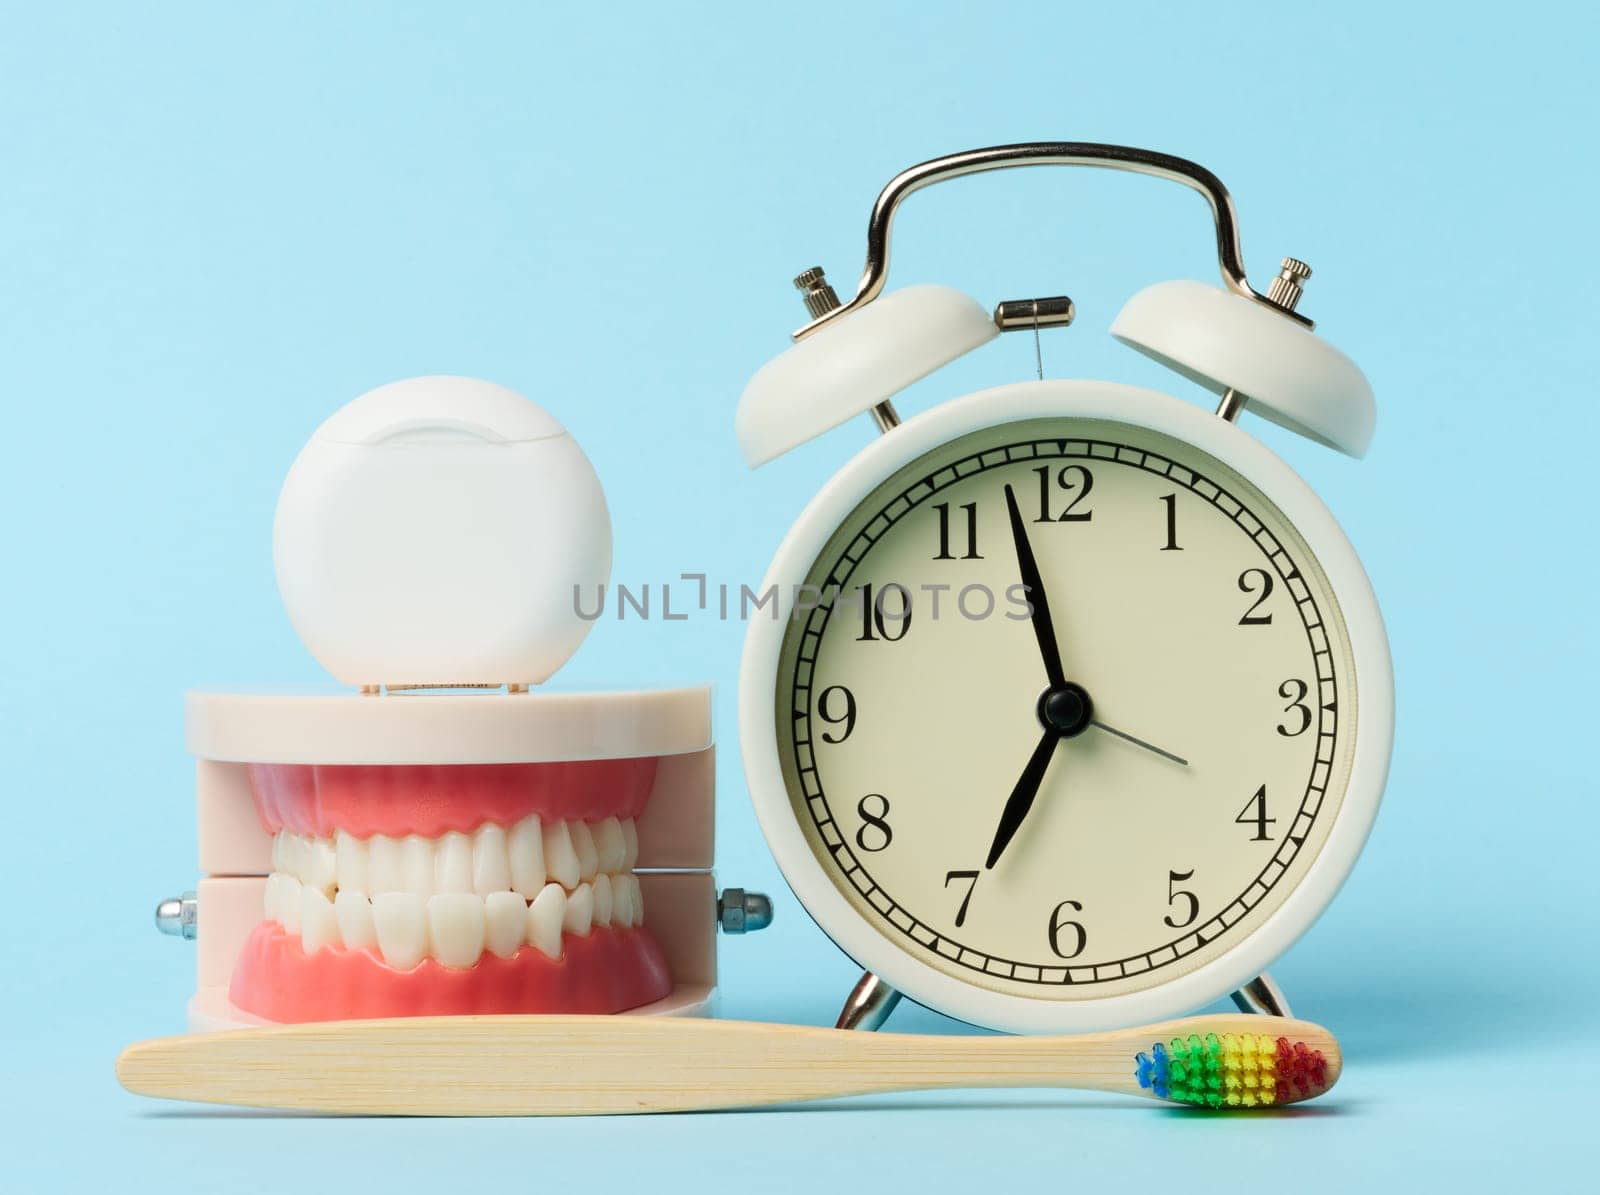 Plastic model of human jaw, alarm clock and dental floss on blue background by ndanko